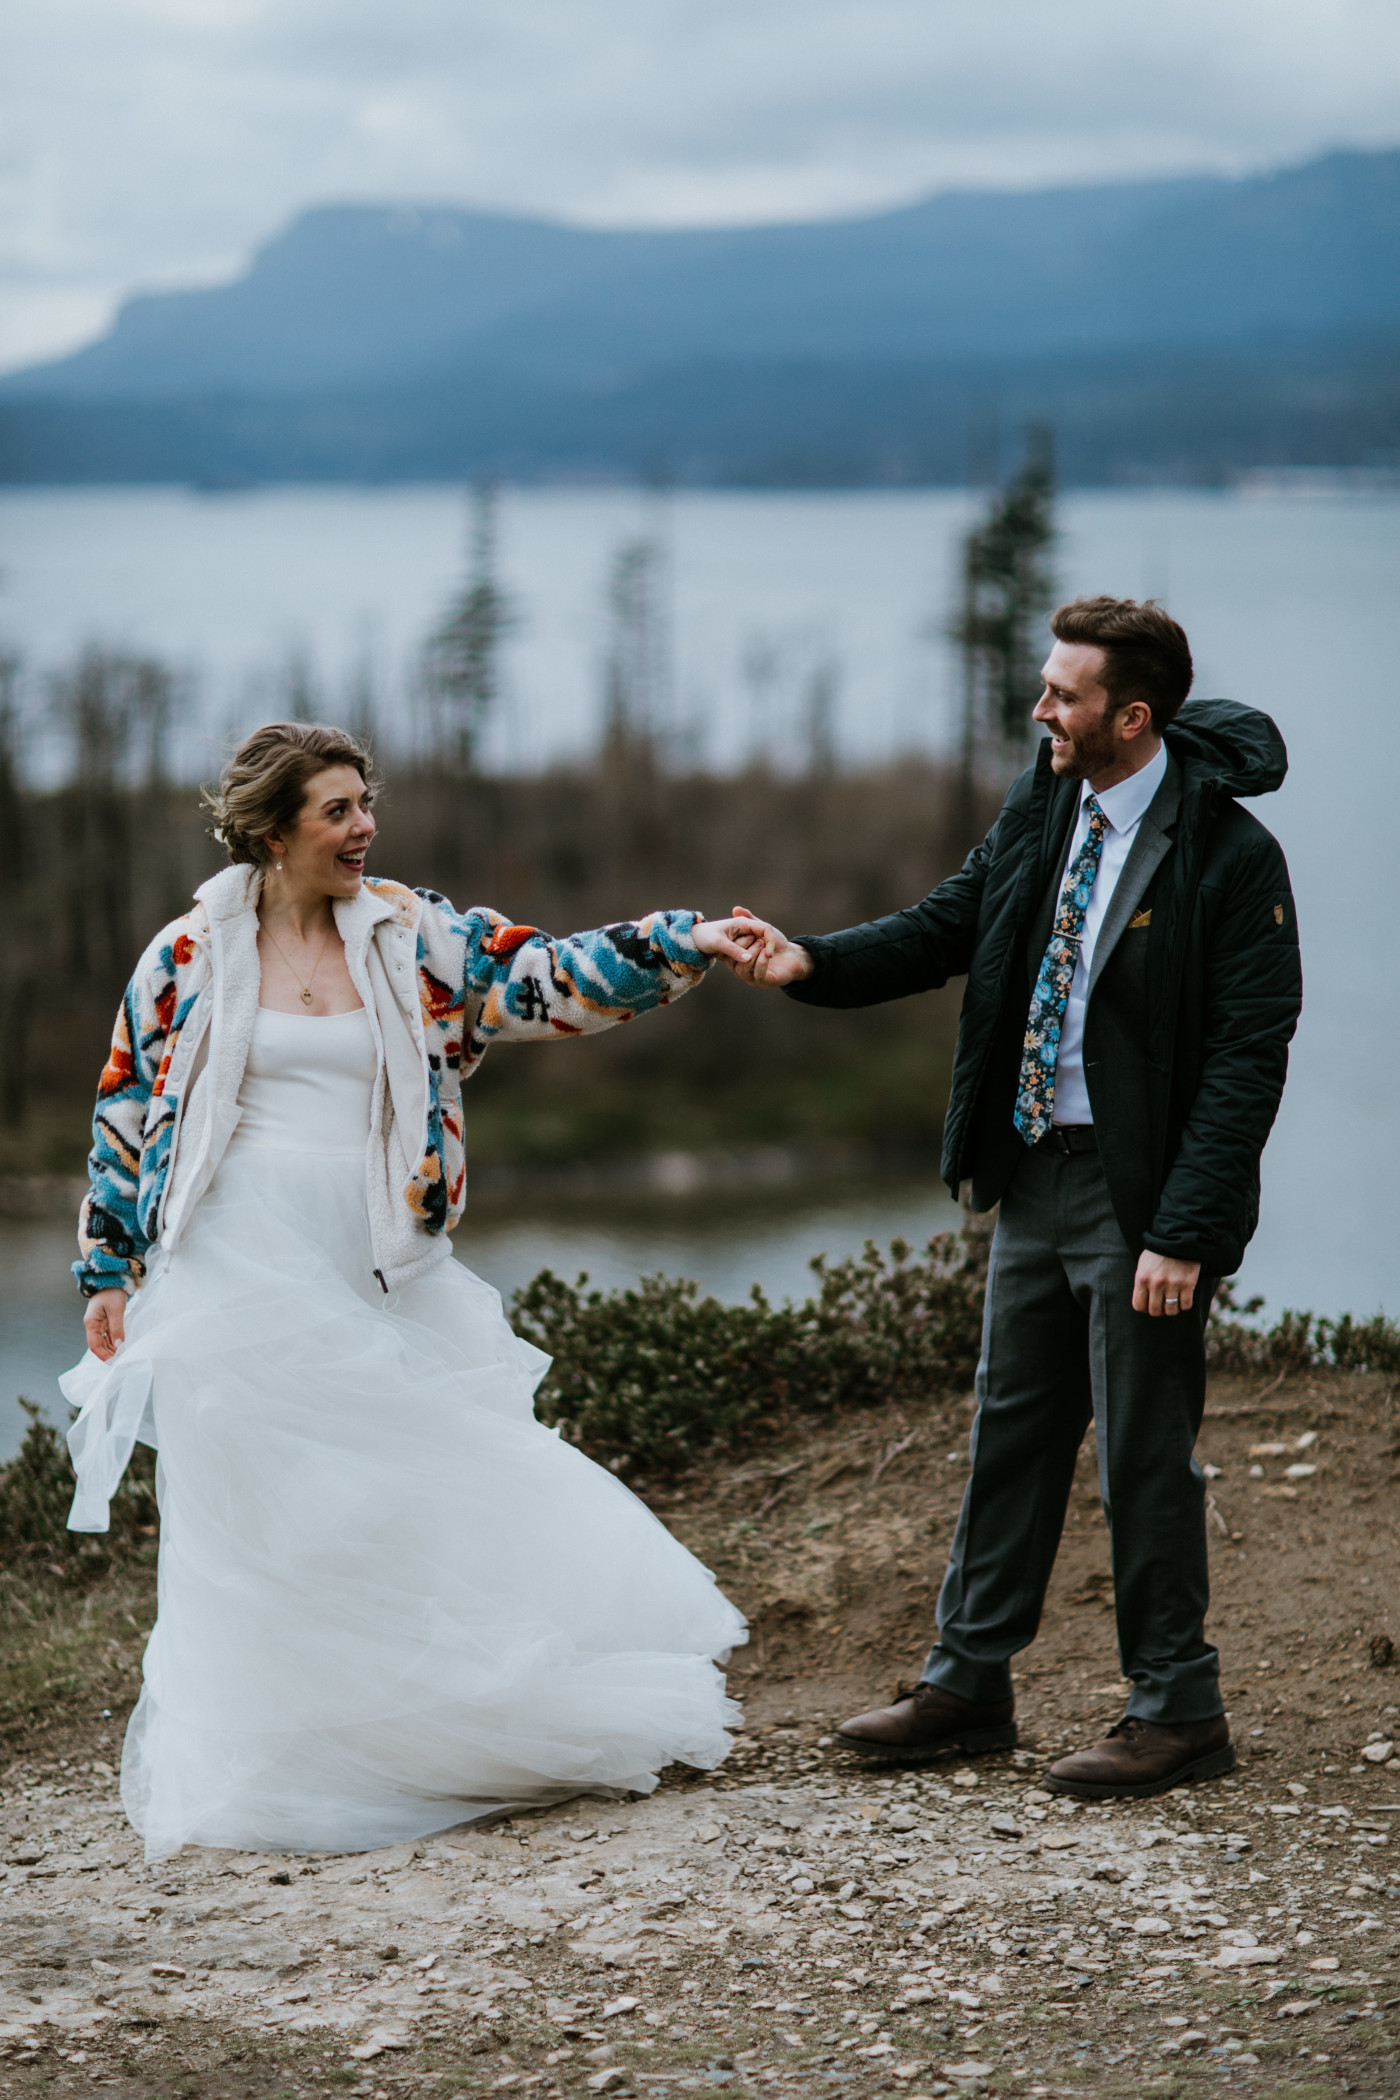 Allison and Lennie dance. Elopement photography at Columbia River Gorge by Sienna Plus Josh.